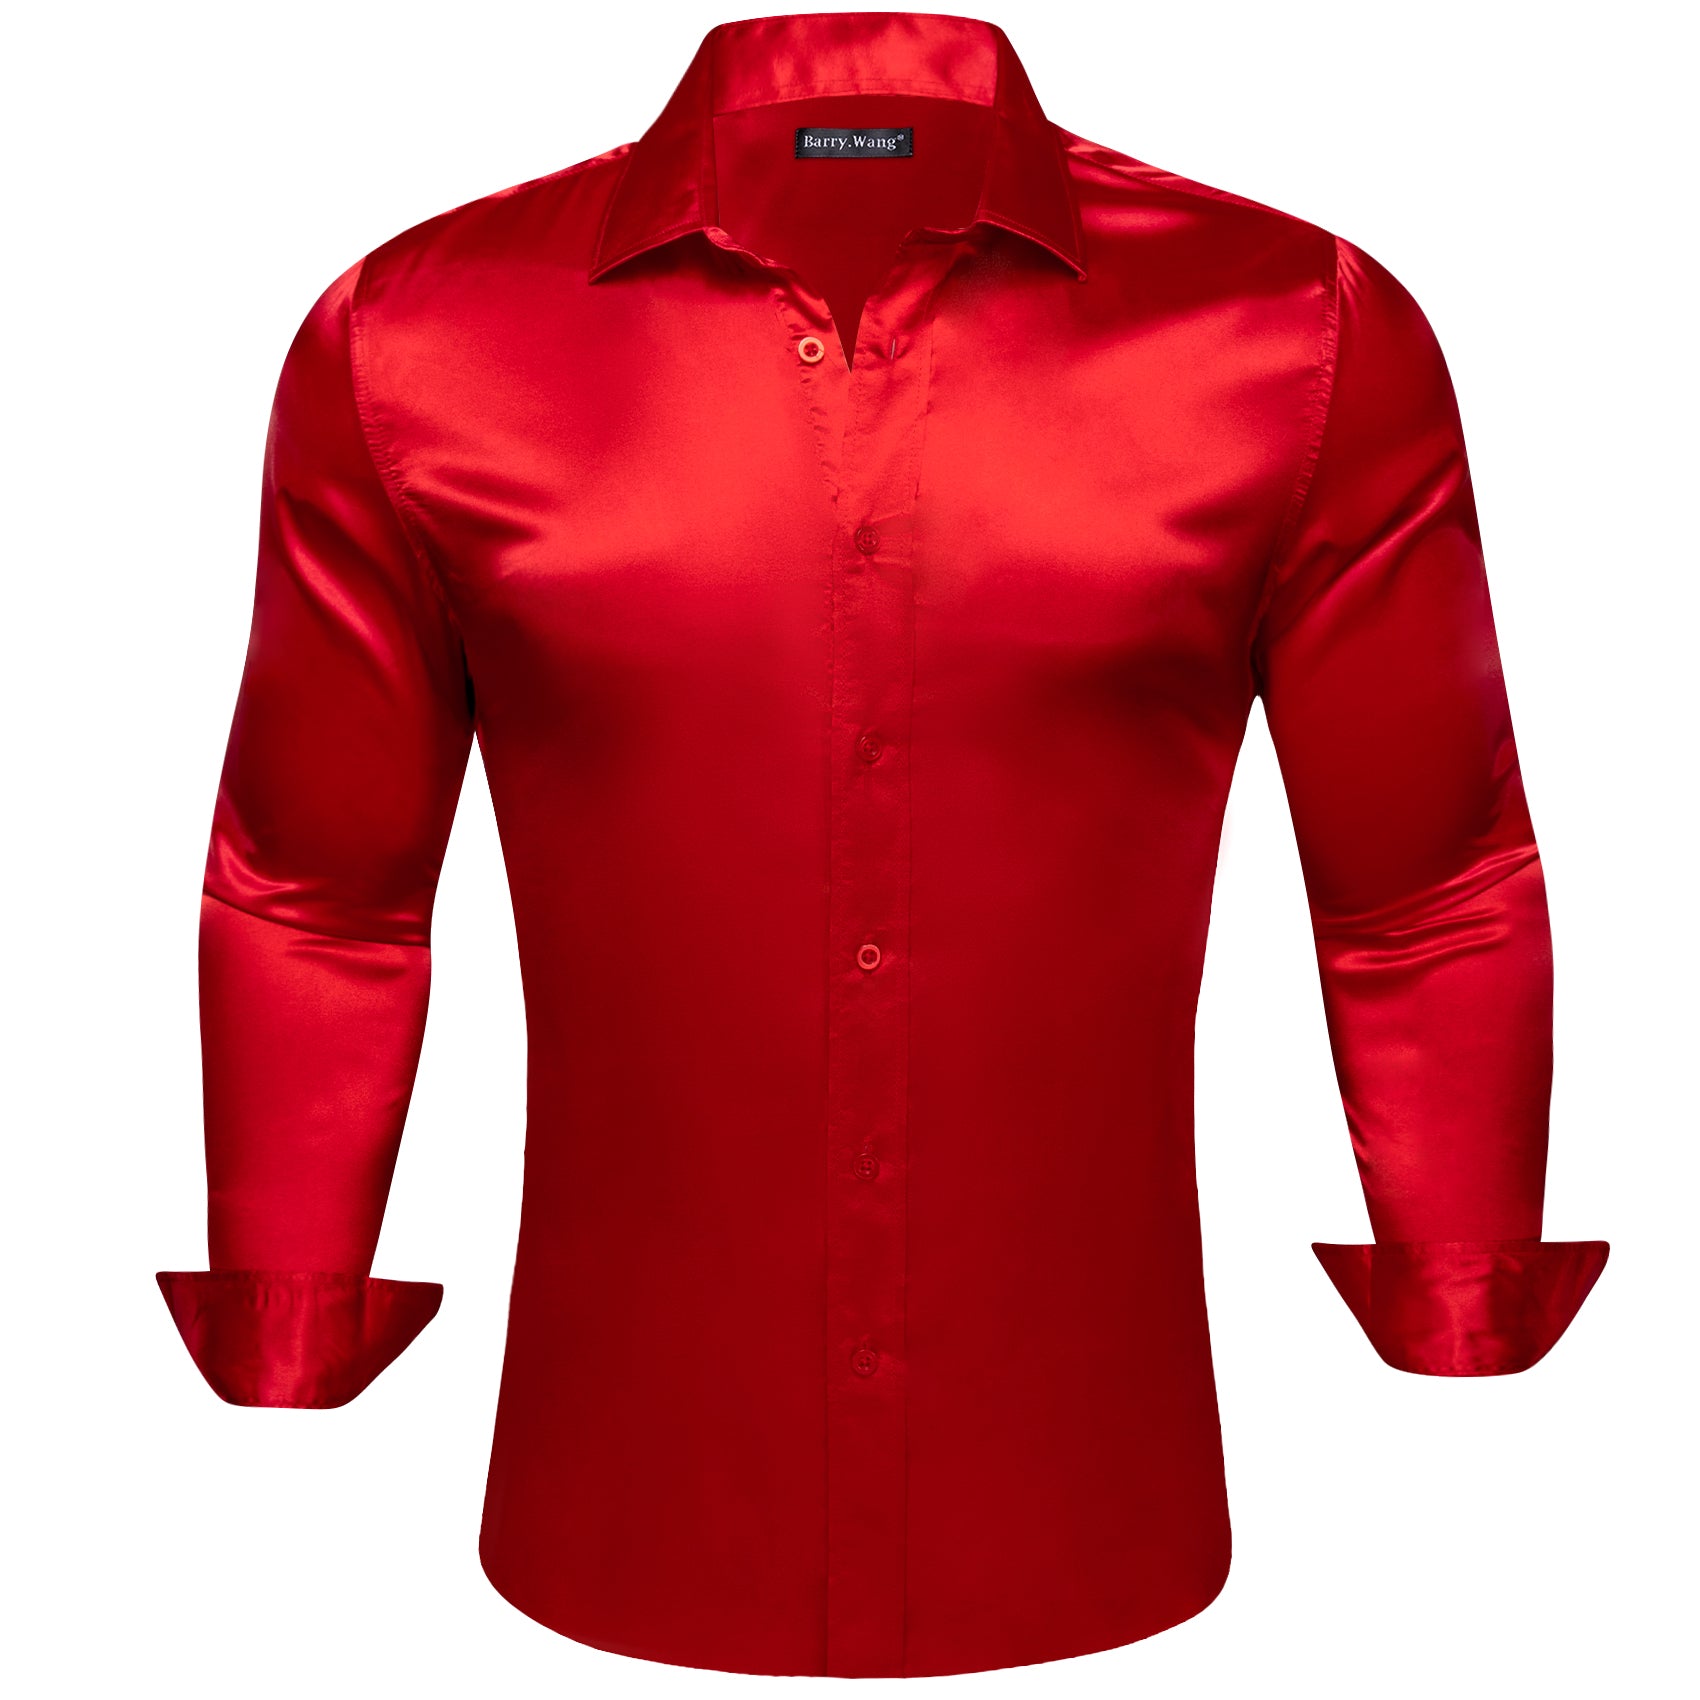 Barry.wang Strong Red Solid Silk Shirt